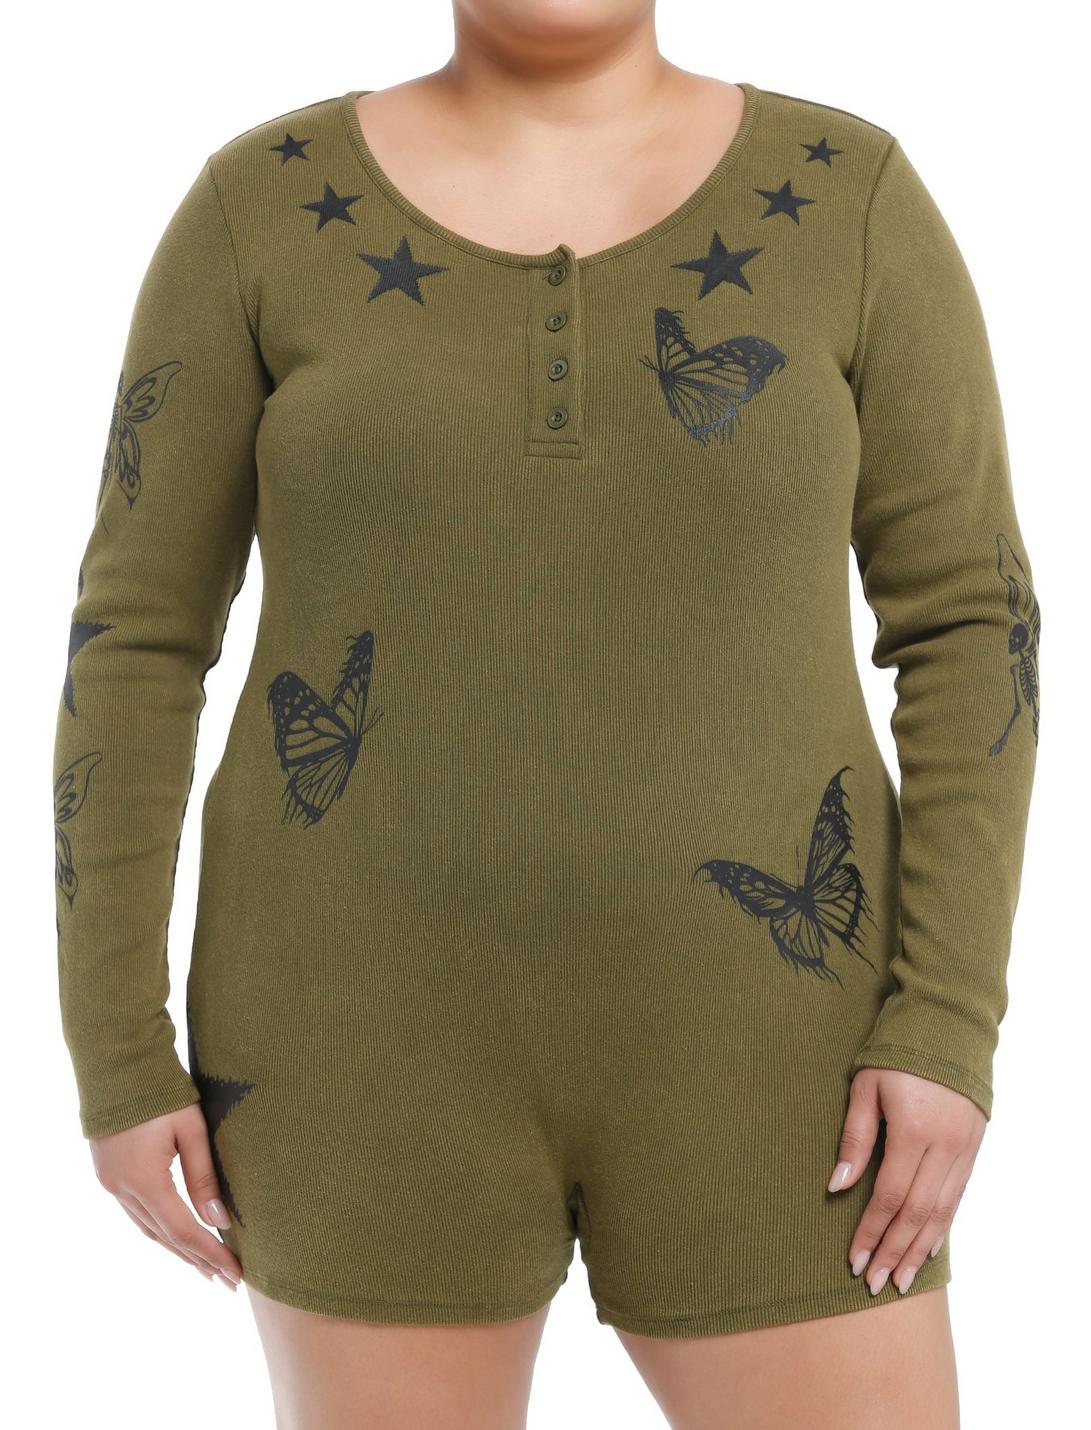 Social Collision Fairy Grunge Long-Sleeve Romper Plus Size, GREEN, hi-res